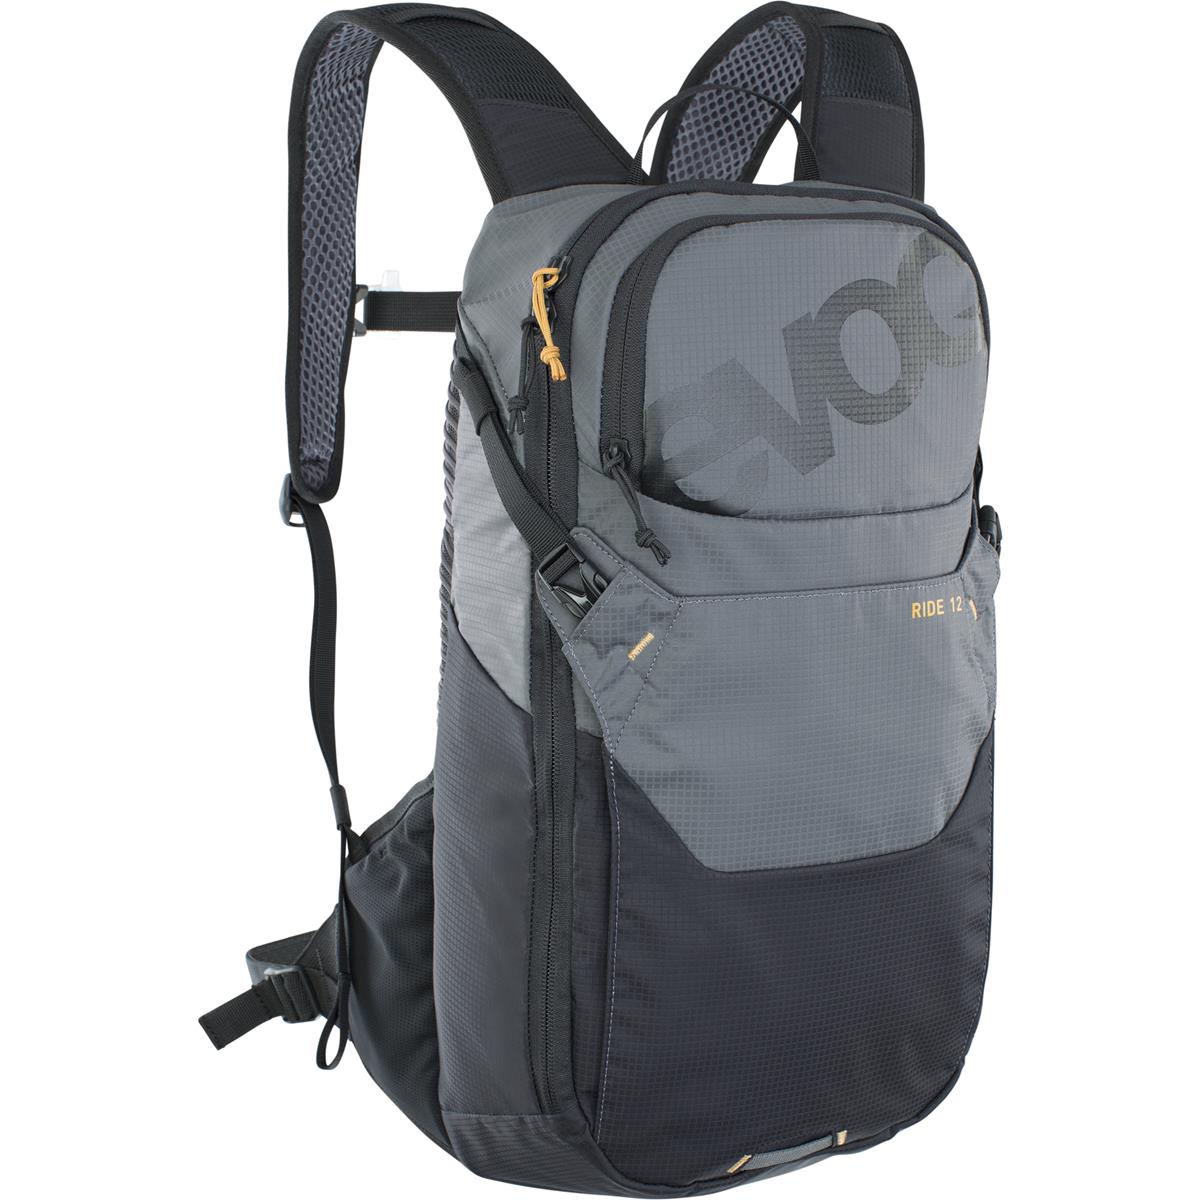 Evoc Backpack with Hydration System Compartment Ride 12 + Carbon Gray/Black